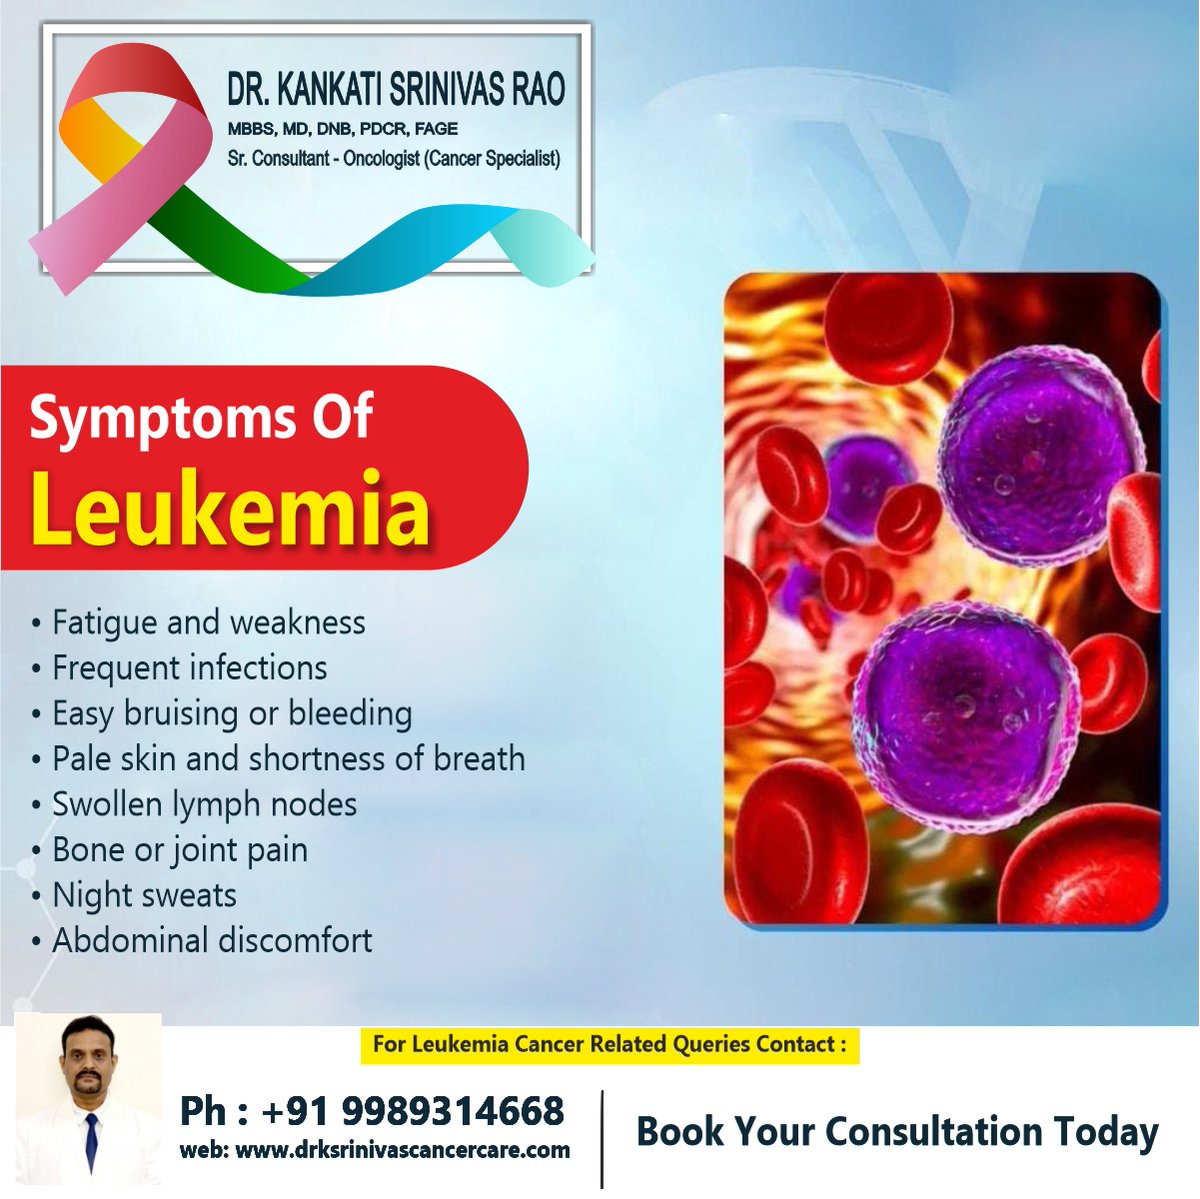 SYMPTOMS OF LEUKEMIA ✔️ Fatigue and weakness ✔️ Frequent infections ✔️ Easy bruising or bleeding ✔️ Place skin and shortness of breath ✔️ Swollen lymph nodes ✔️ Bone or joint pain ✔️ Night sweats ✔️ Abdominal discomfort #drsrinivasrao #leukemia #bloodcancer #anemia